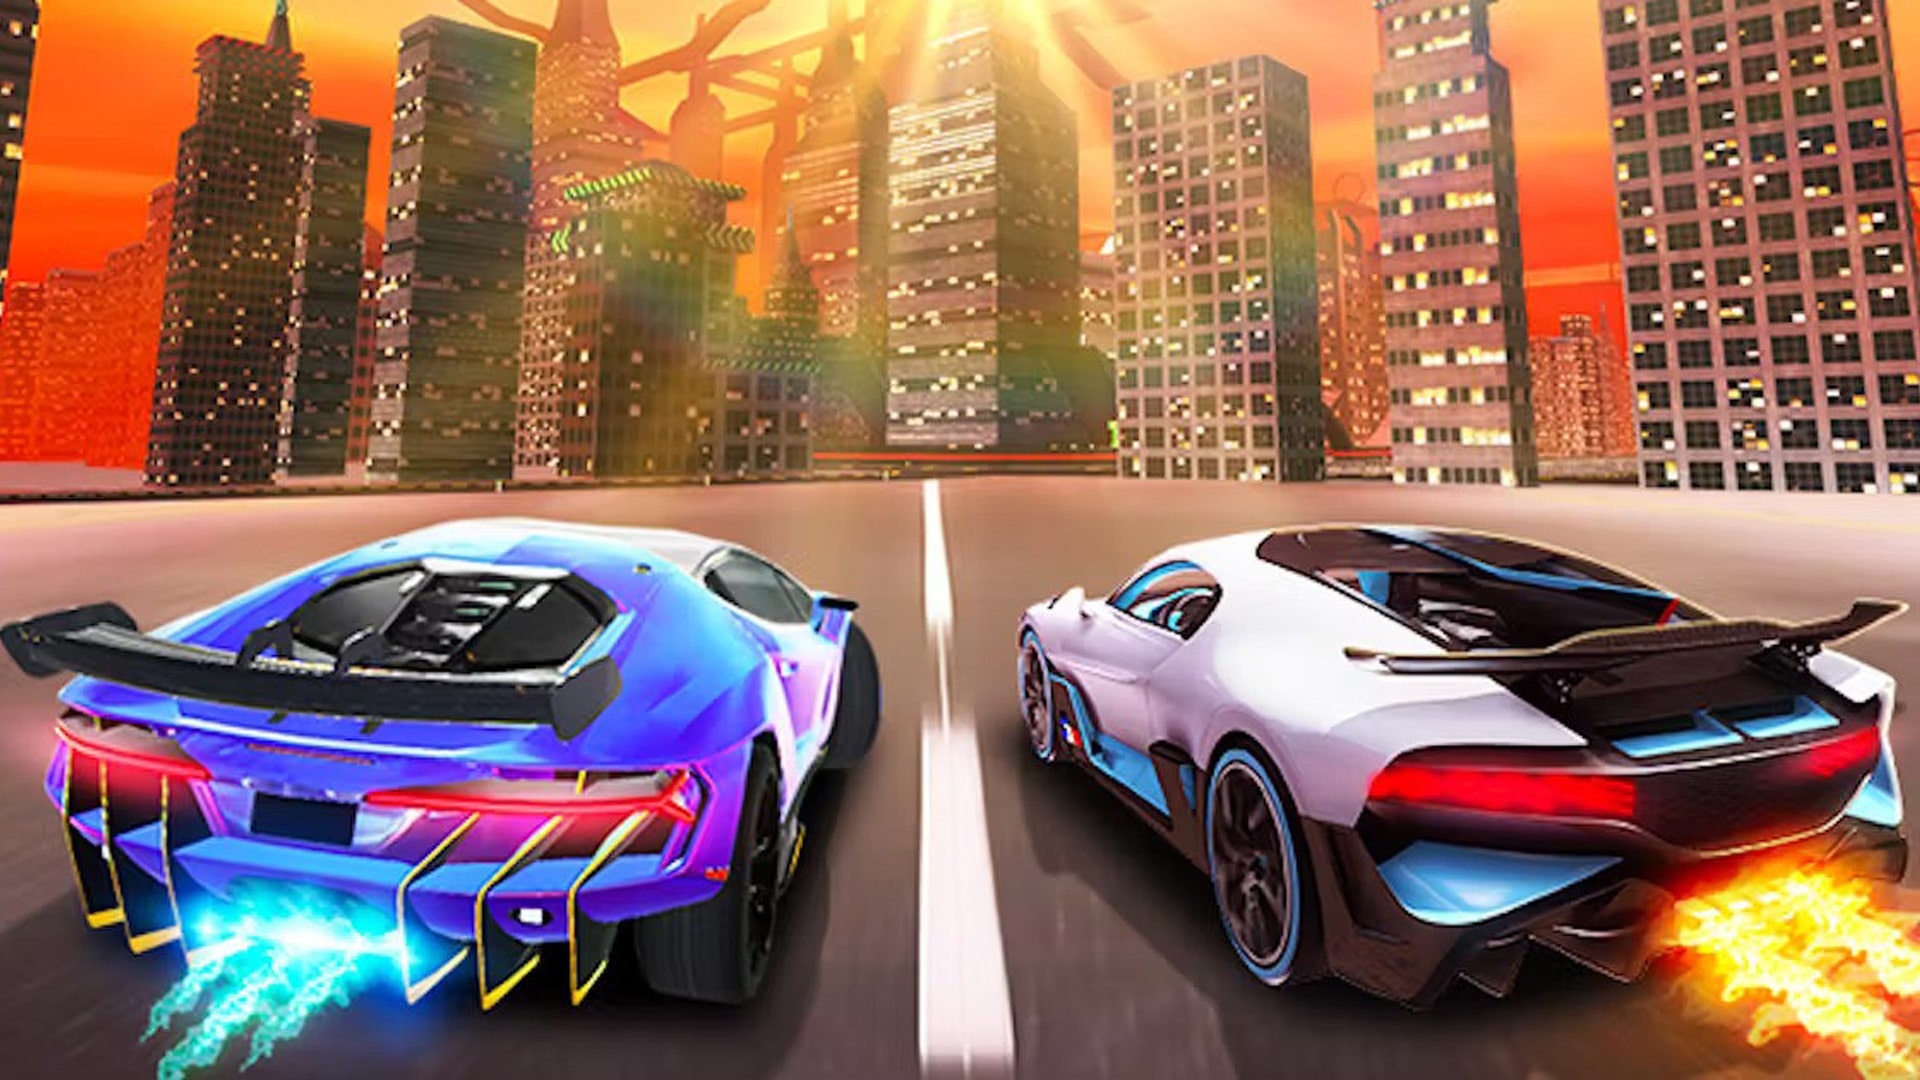 Dynamic night-time cityscape as backdrop to high-speed car racing in Night City Racing game